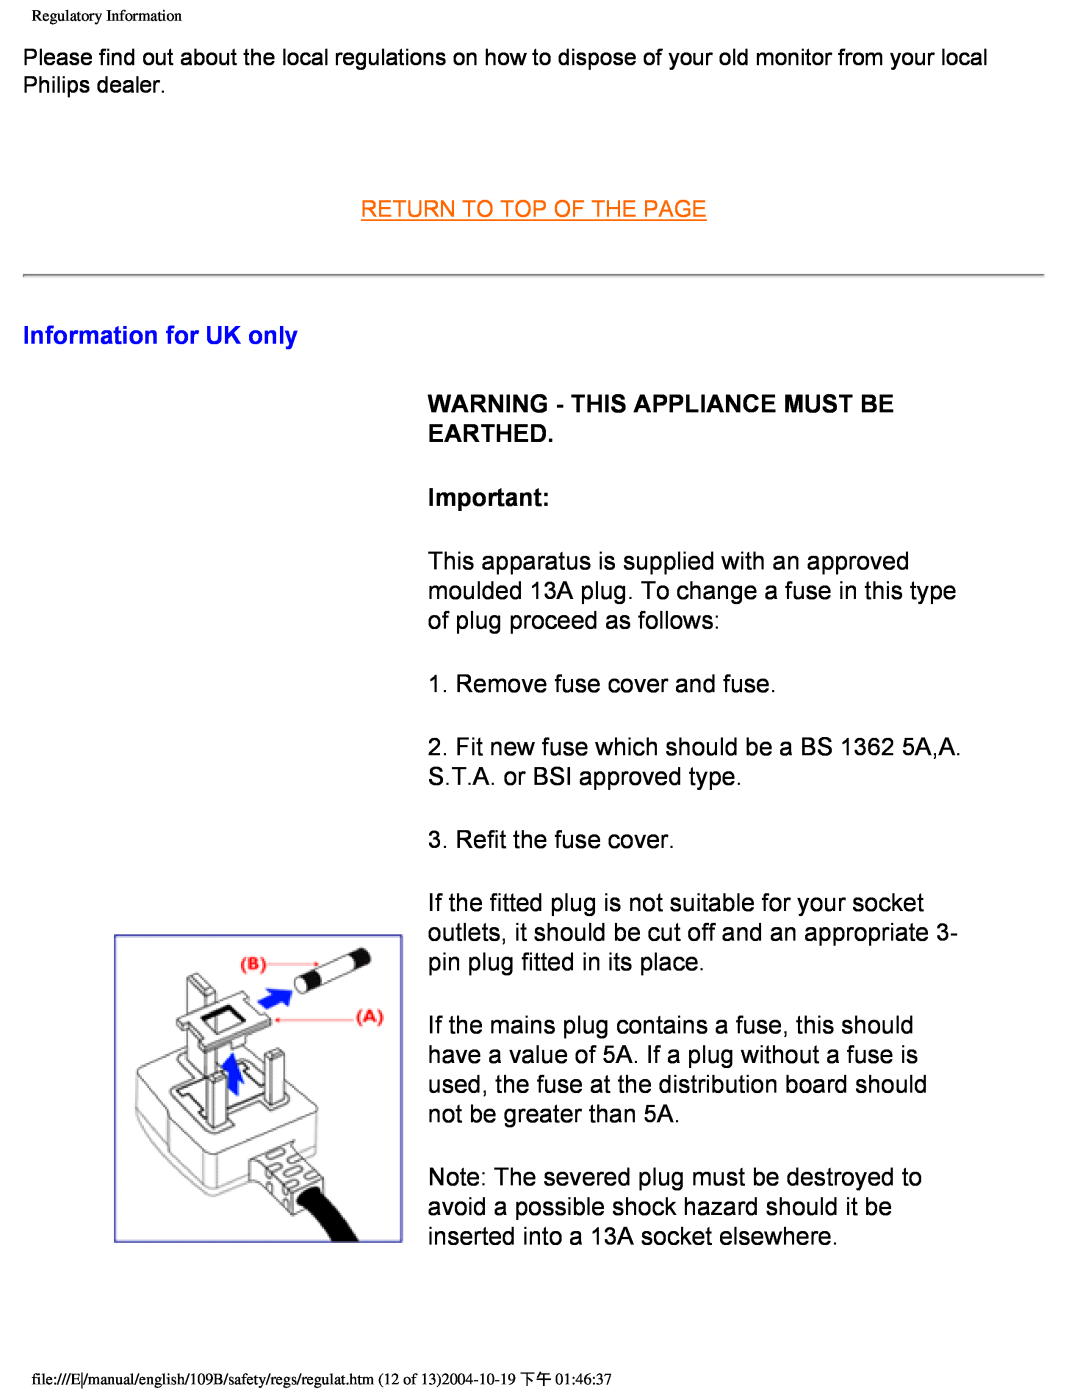 Philips 109B user manual Information for UK only, Warning - This Appliance Must Be Earthed 